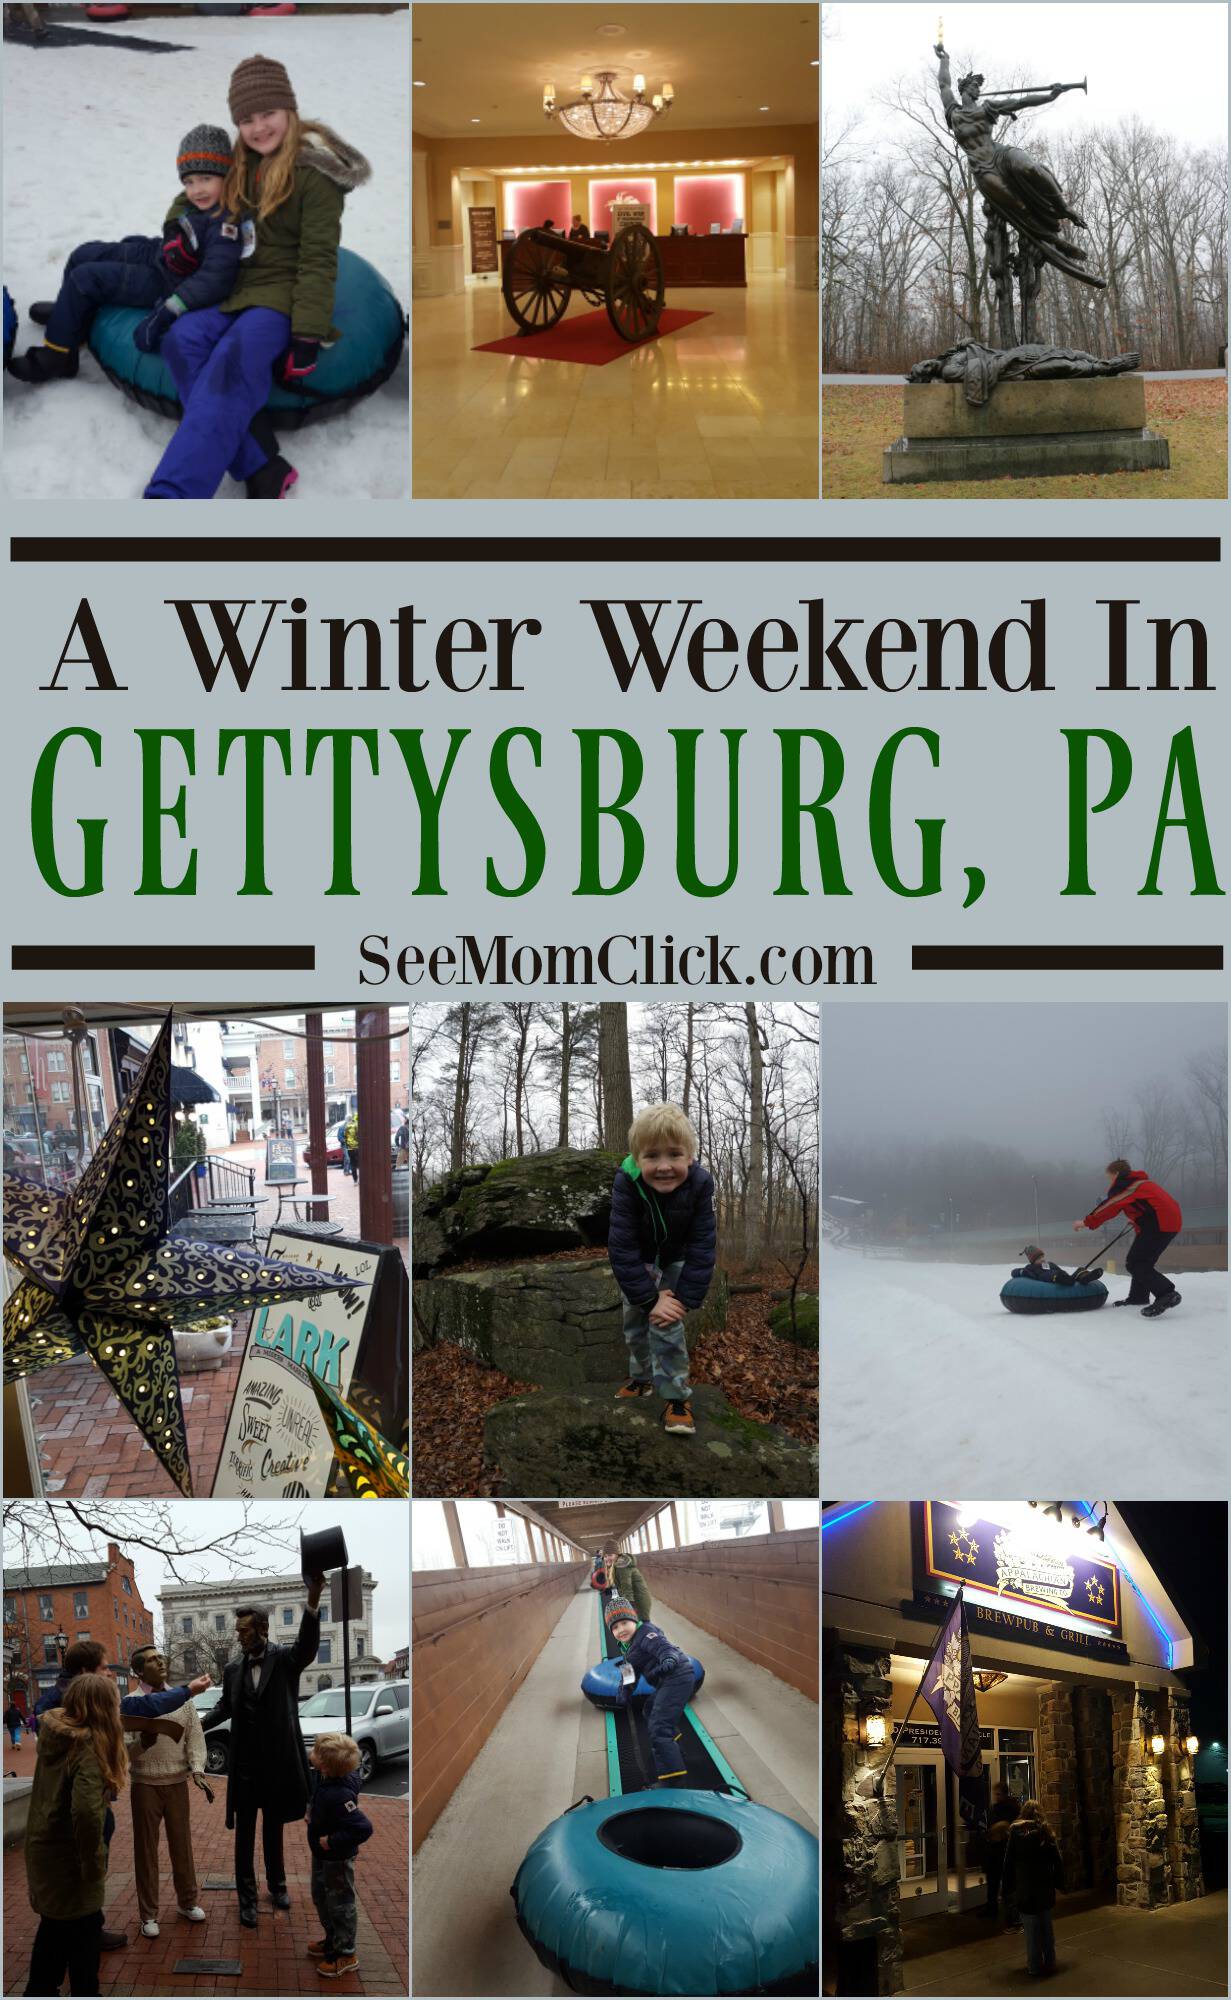 In a town known mostly for its historic significance, there's a lot more to do than tour the battlefield (thought that is a must!). A weekend getaway in Gettysburg, PA is both education and so much fun in the winter! Here are our favorite stops.